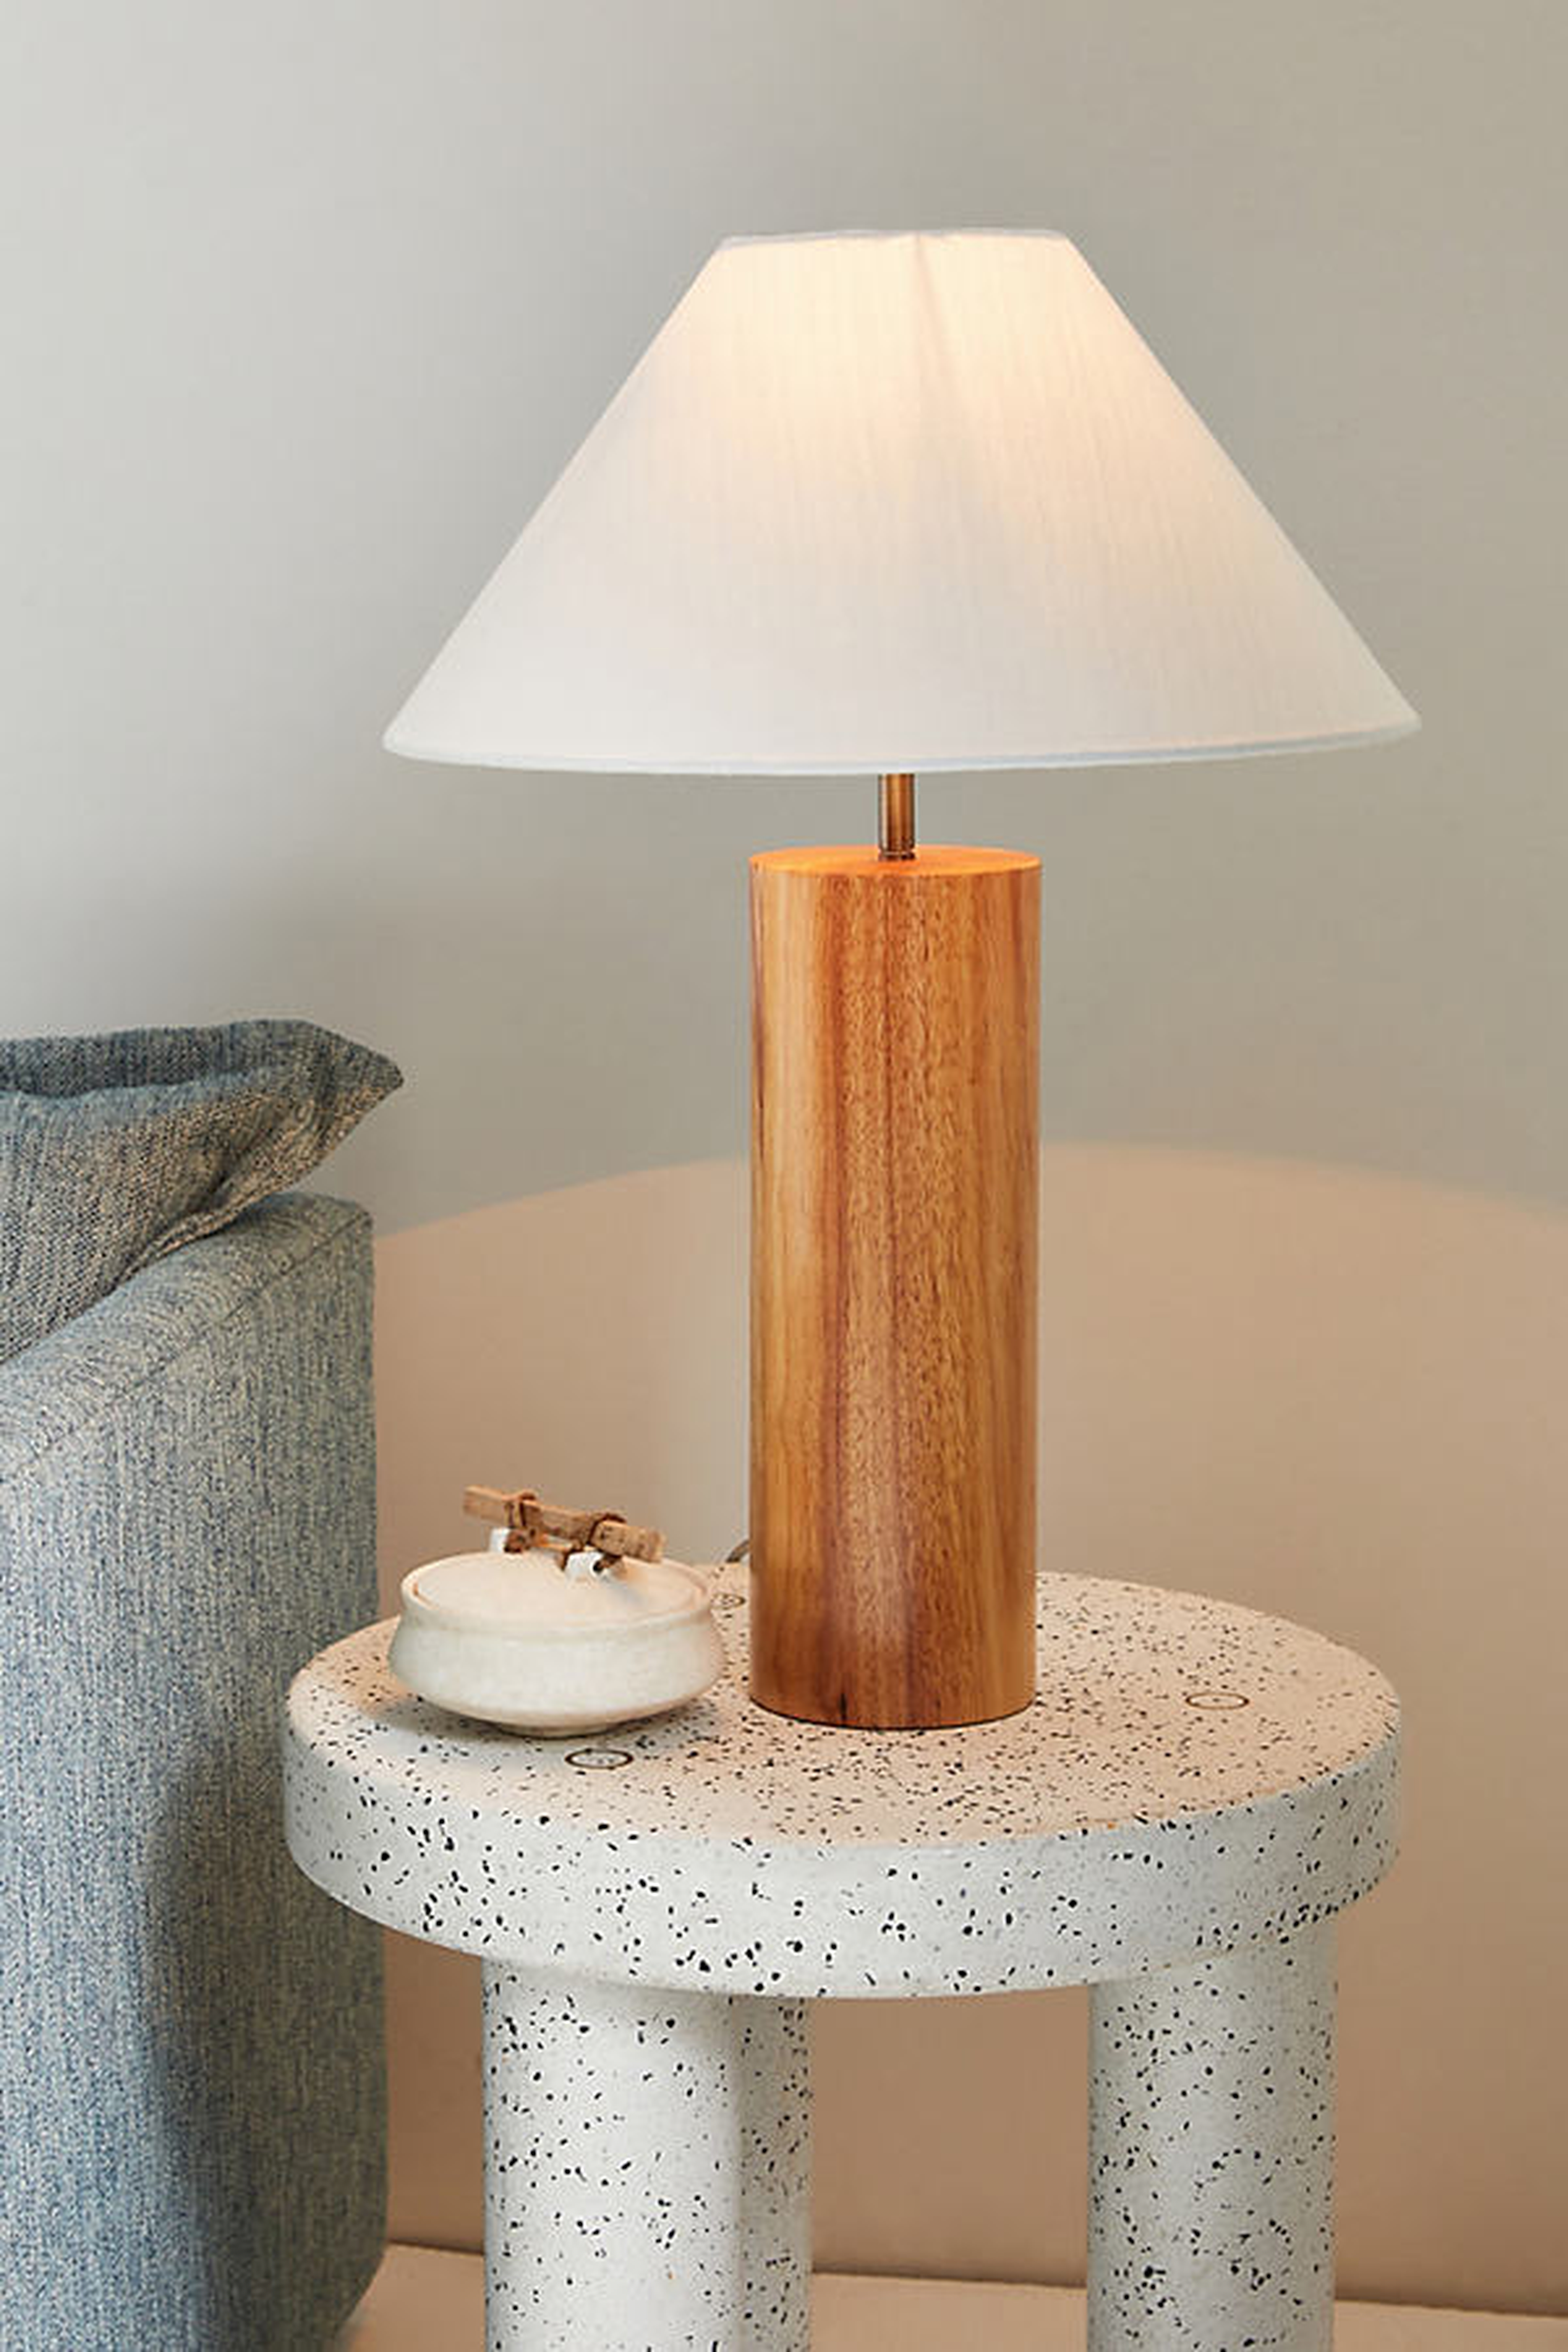 Frederick Table Lamp By Anthropologie in Brown - Anthropologie